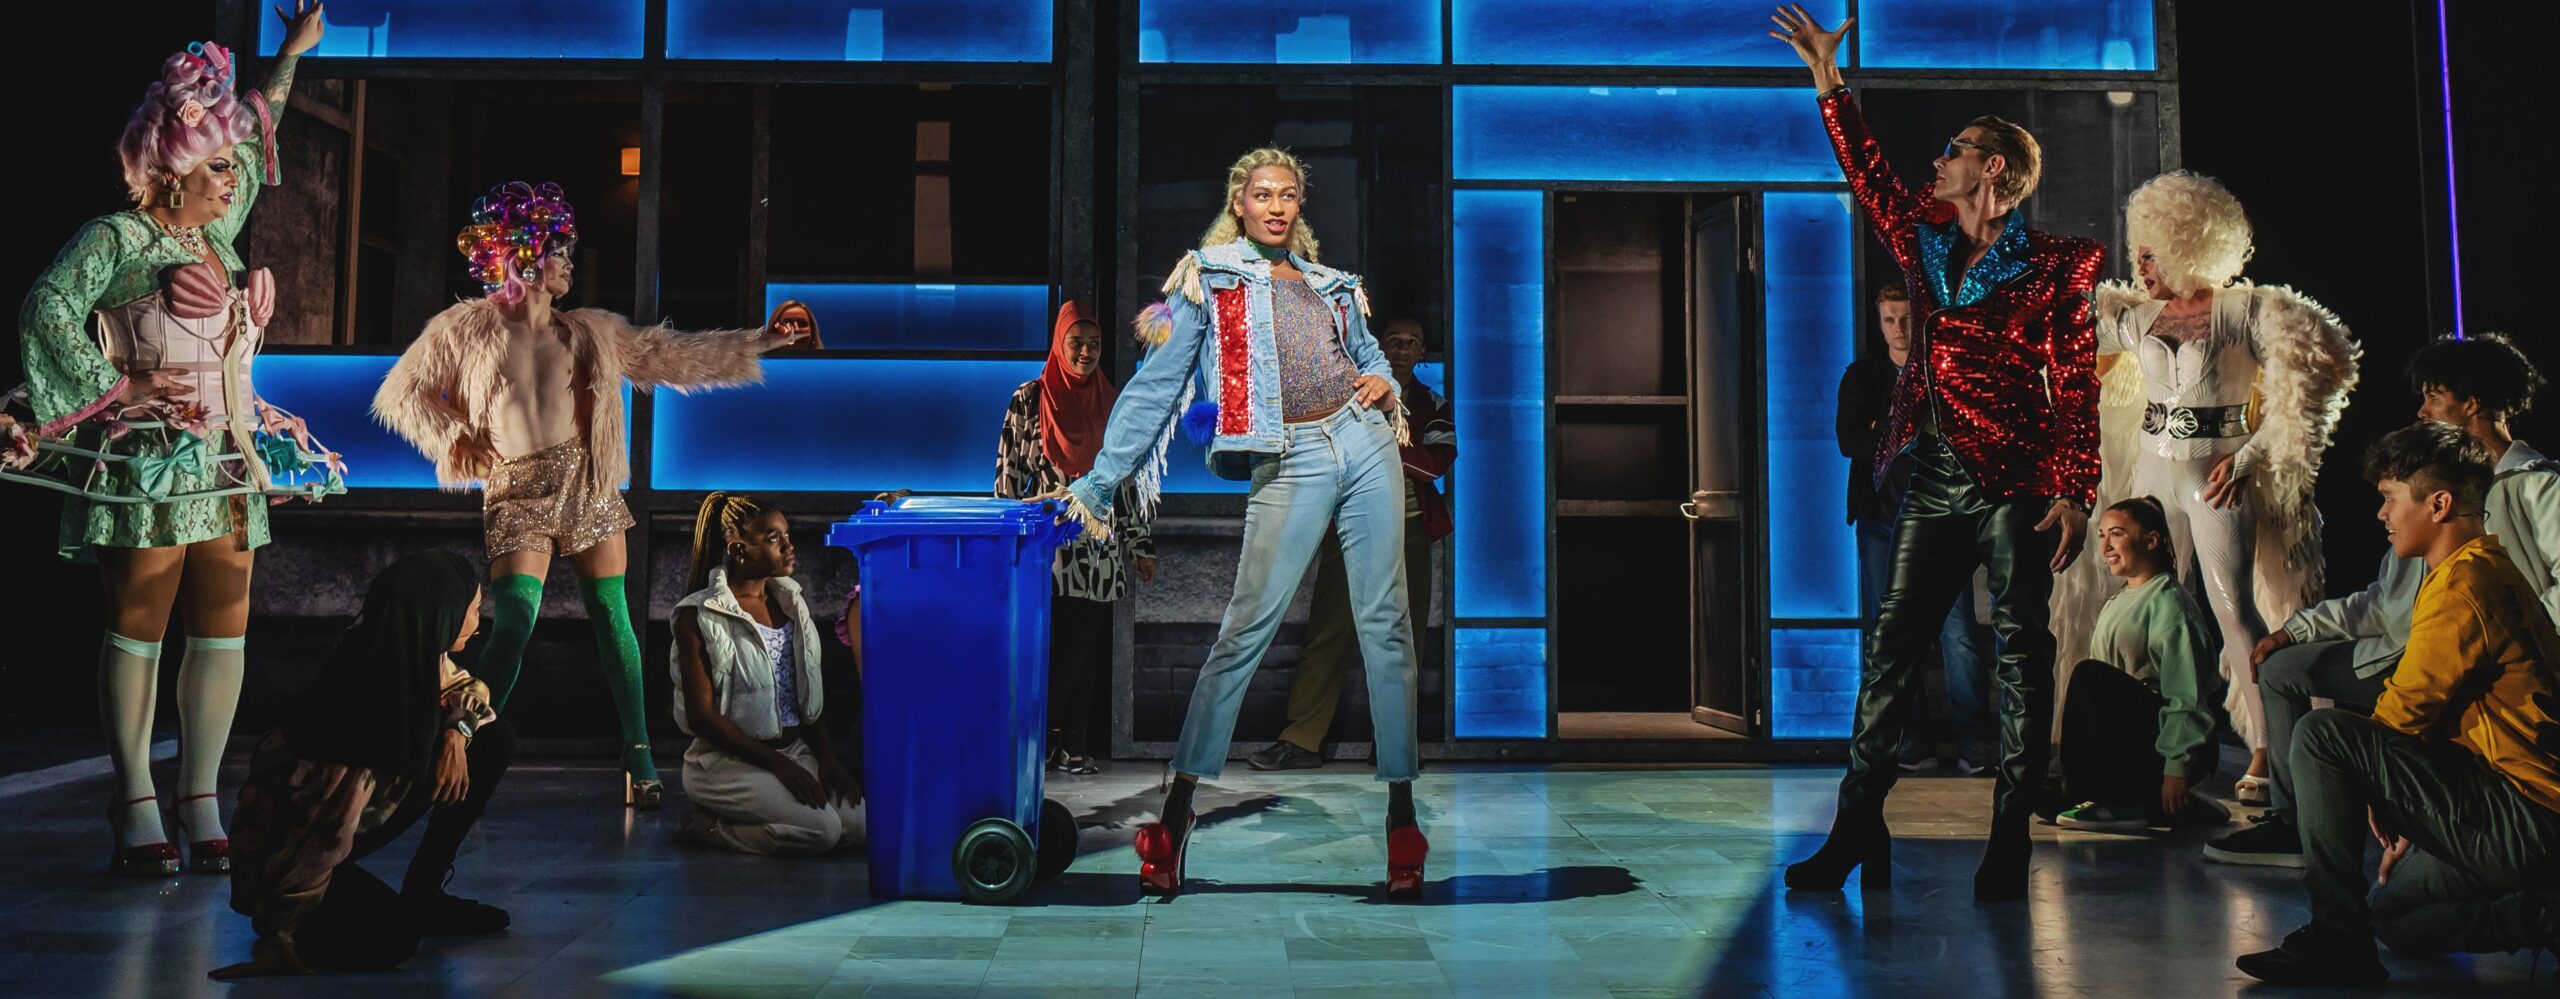 A Glittering Triumph: “Everybody’s Talking About Jamie” at Birmingham Hippodrome